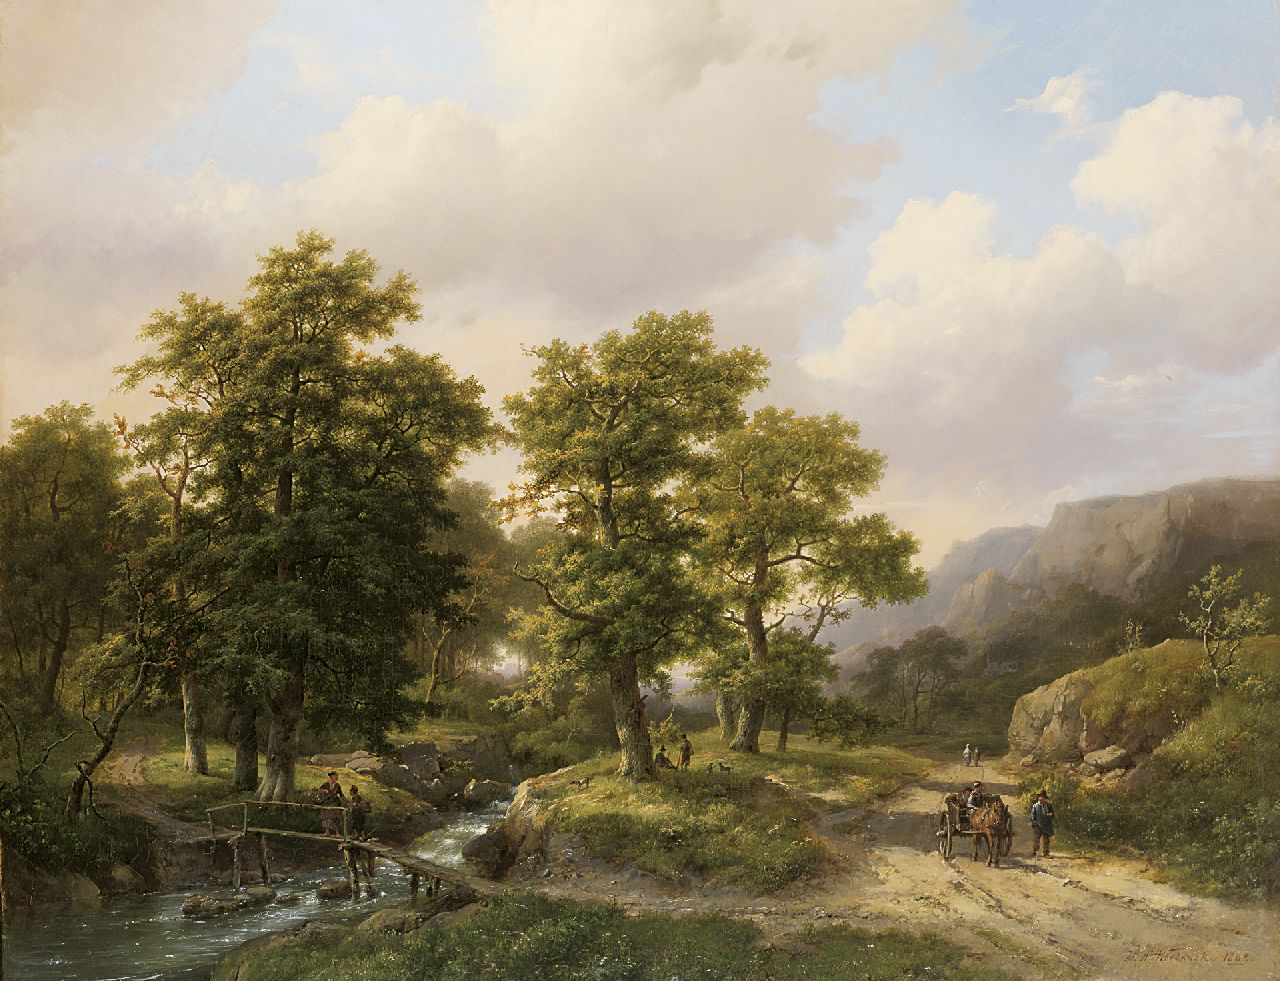 Koekkoek/Koekkoek sr. M.A. I /H. M.A.I /H.  | Marinus Adrianus /Hermanus Koekkoek/Koekkoek sr. M.A. I /H., A wooded mountain landscape with a cart and figures near a creek, oil on canvas 61.8 x 79.9 cm, signed l.r. and dated 1862